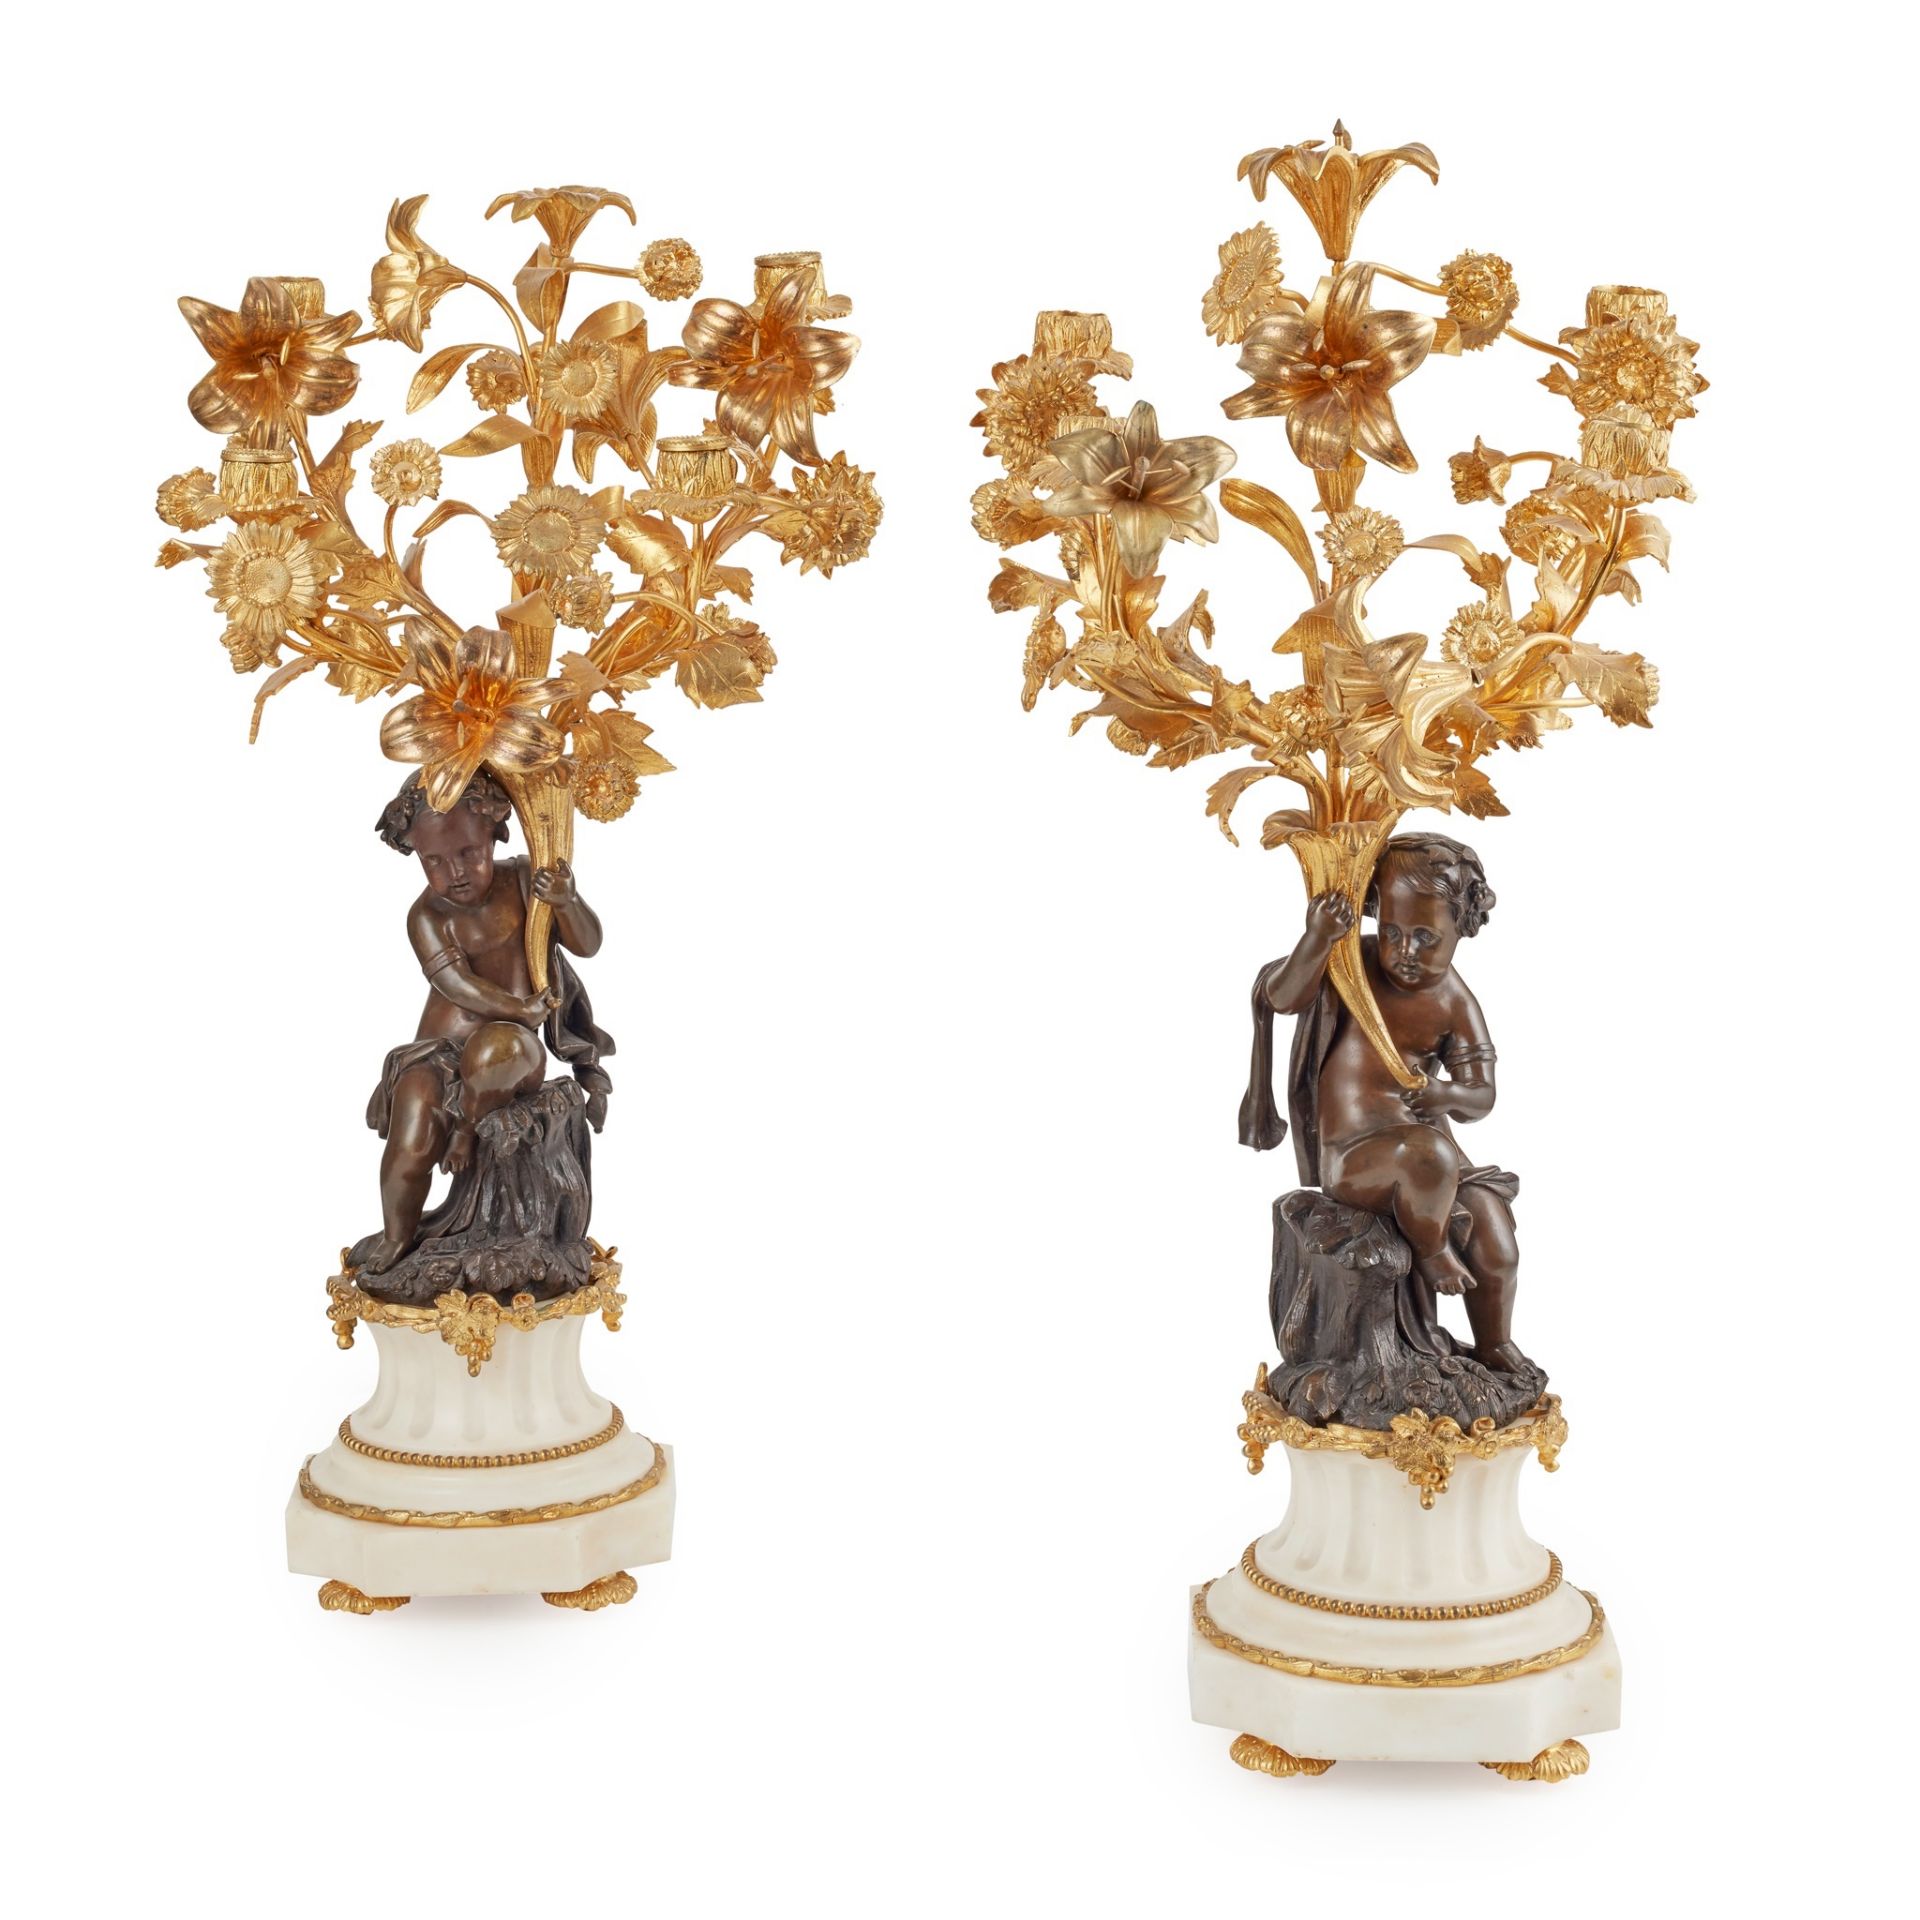 FRENCH GILT AND PATINATED BRONZE AND MARBLE MANTLE CLOCK GARNITURE, AFTER CLODION 19TH CENTURY - Image 2 of 2